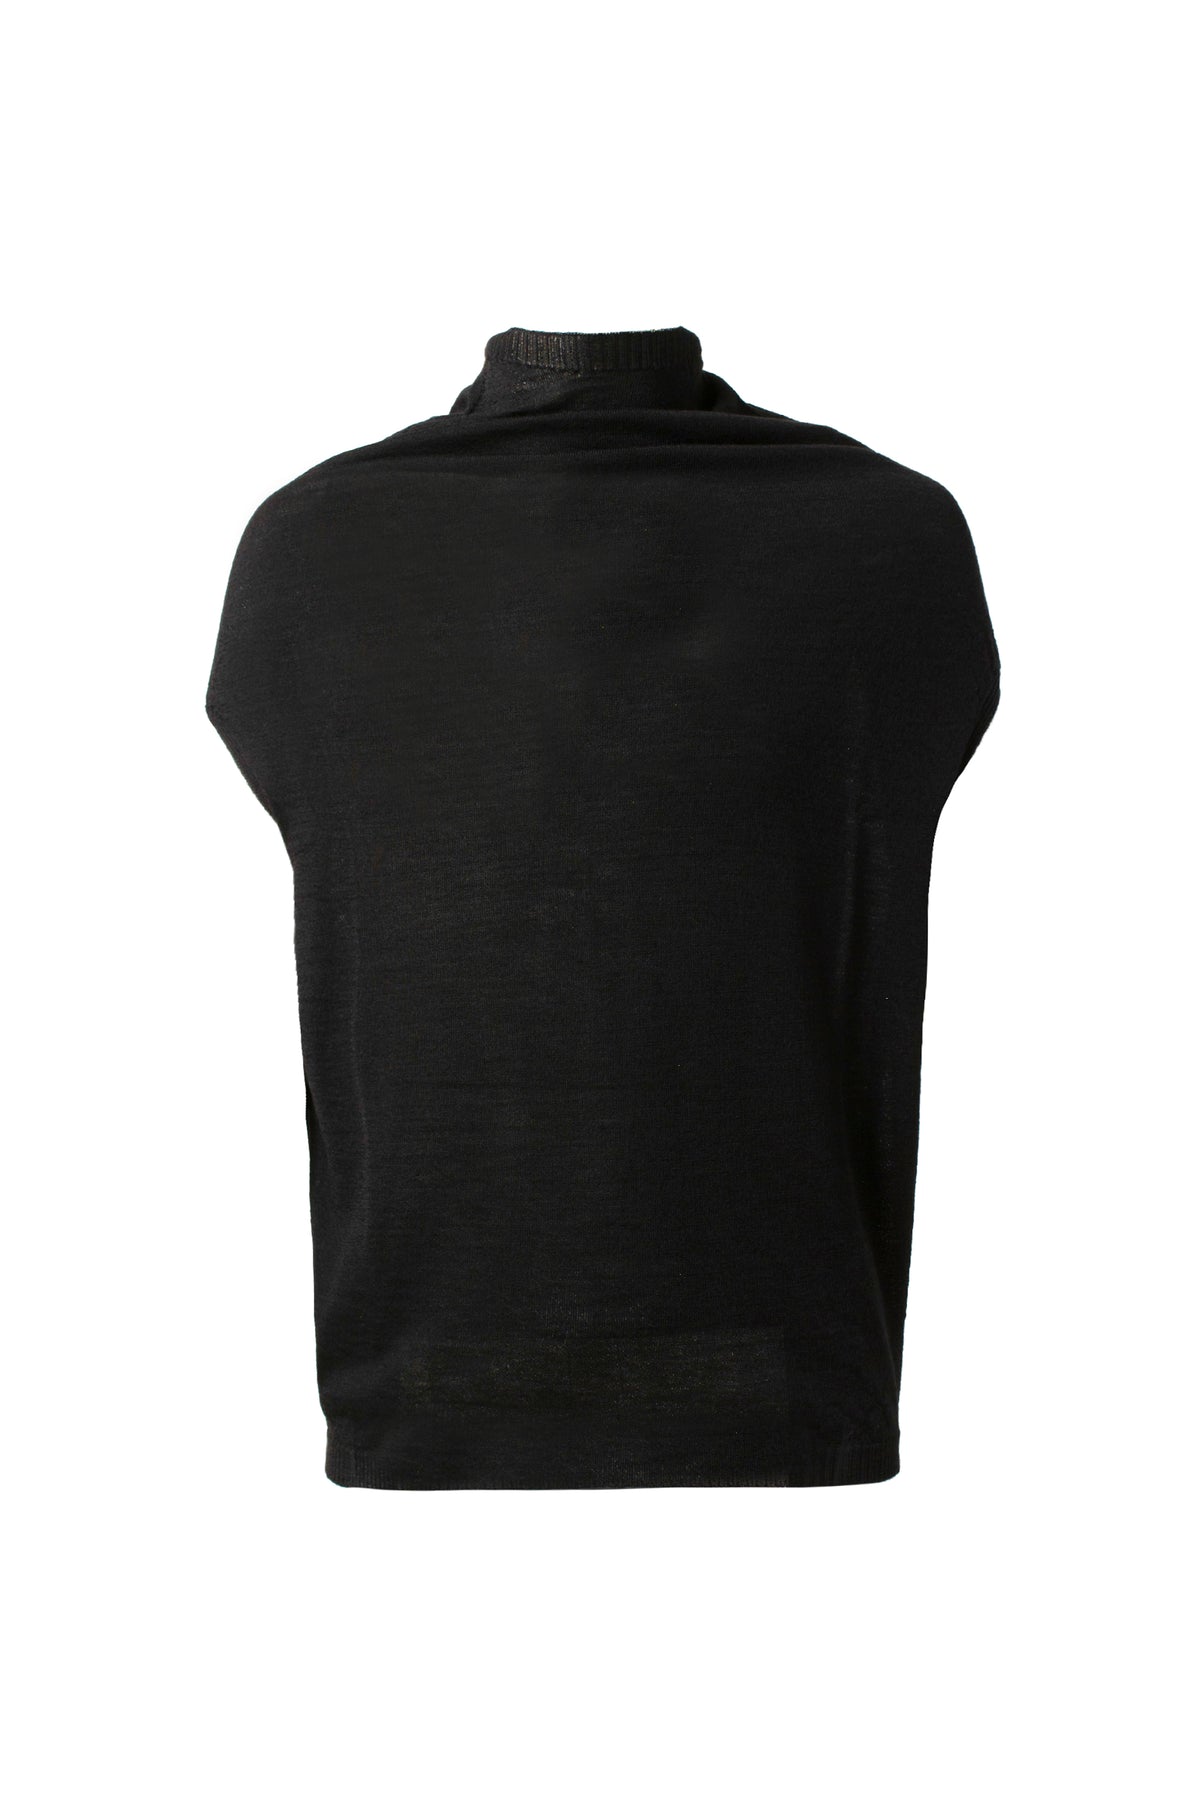 SL CRATER KNIT / BLK